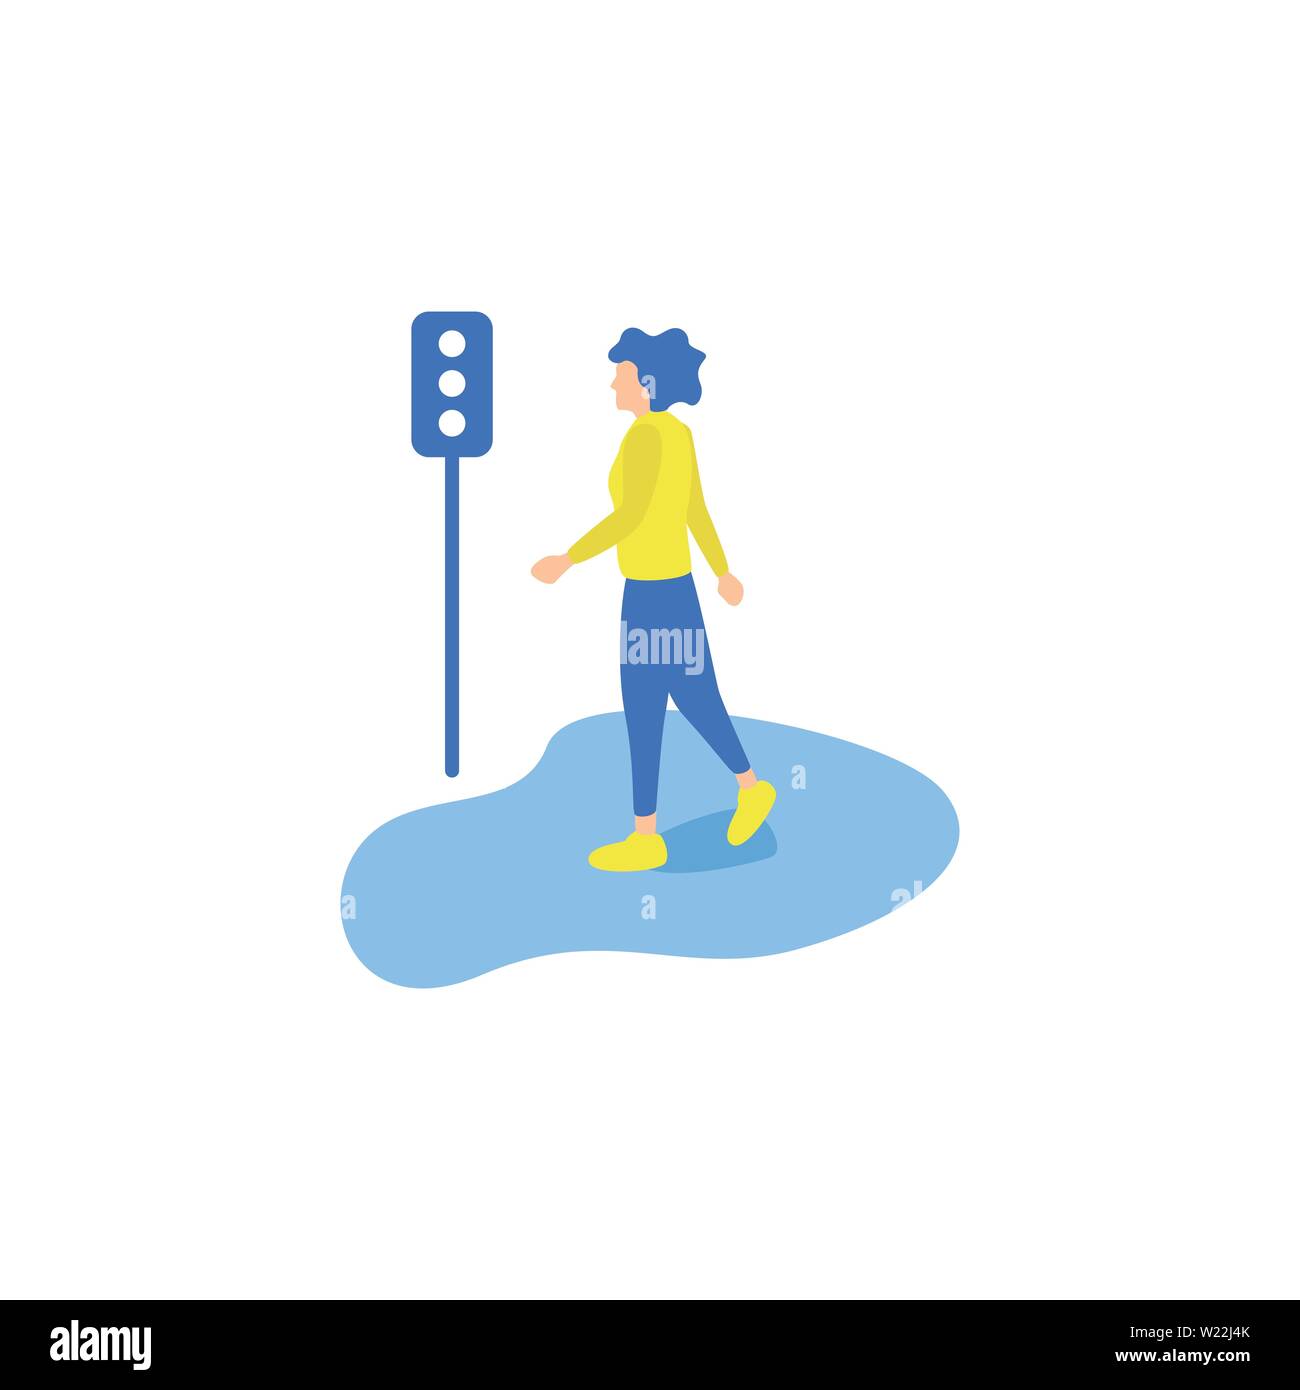 Flat Design Illustration of a Woman Walking Through a Traffic Lamp, Business Activities Walking Stock Vector